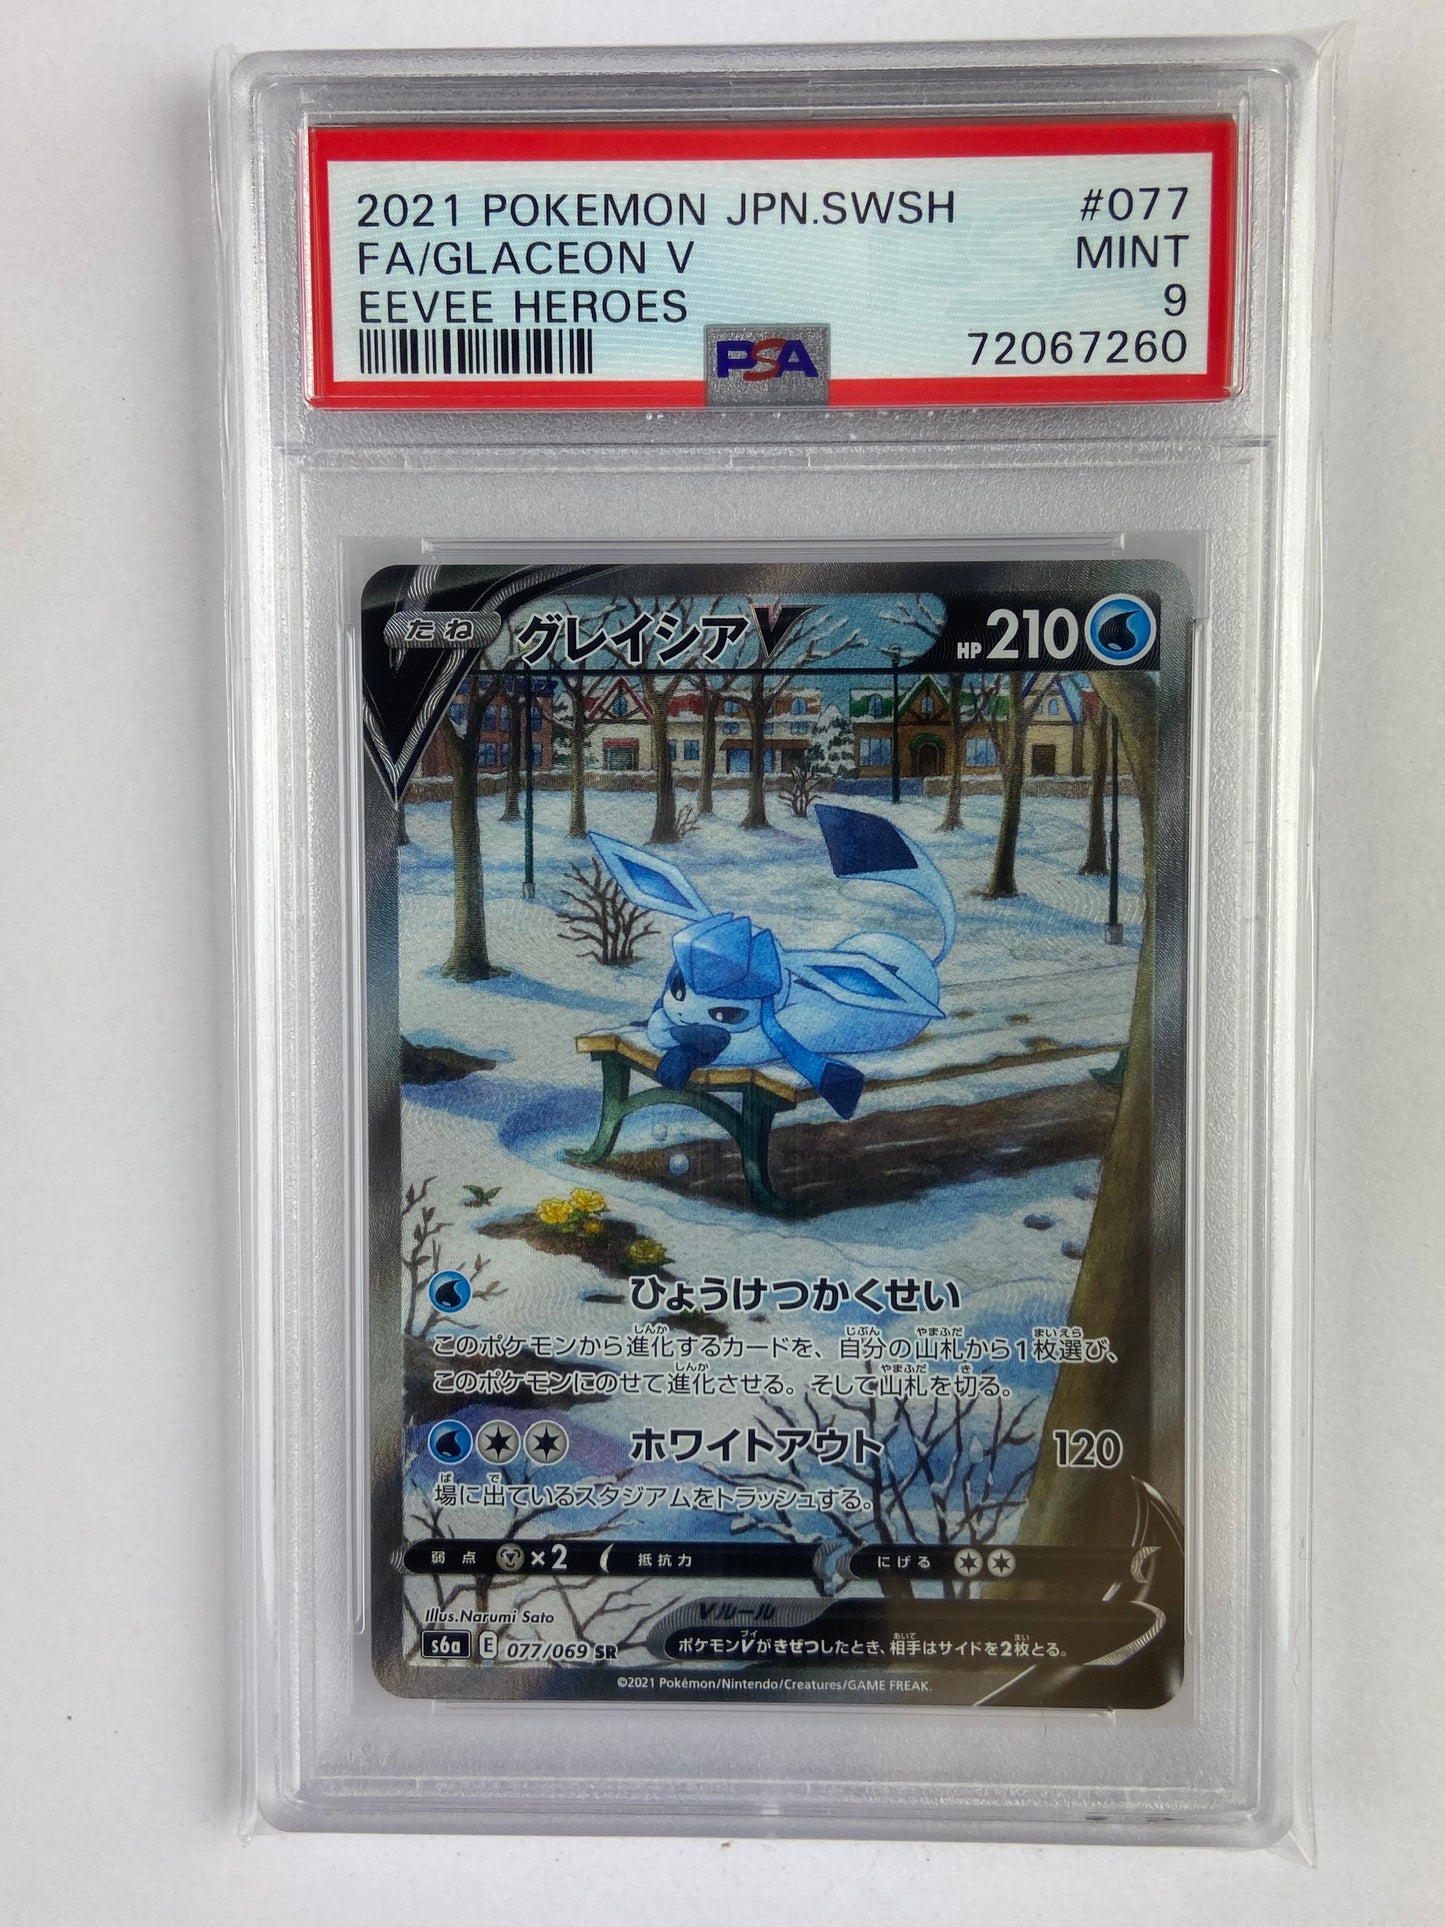 Glaceon V Eevee Heroes s6a 077/069 SR Japanese PSA 9